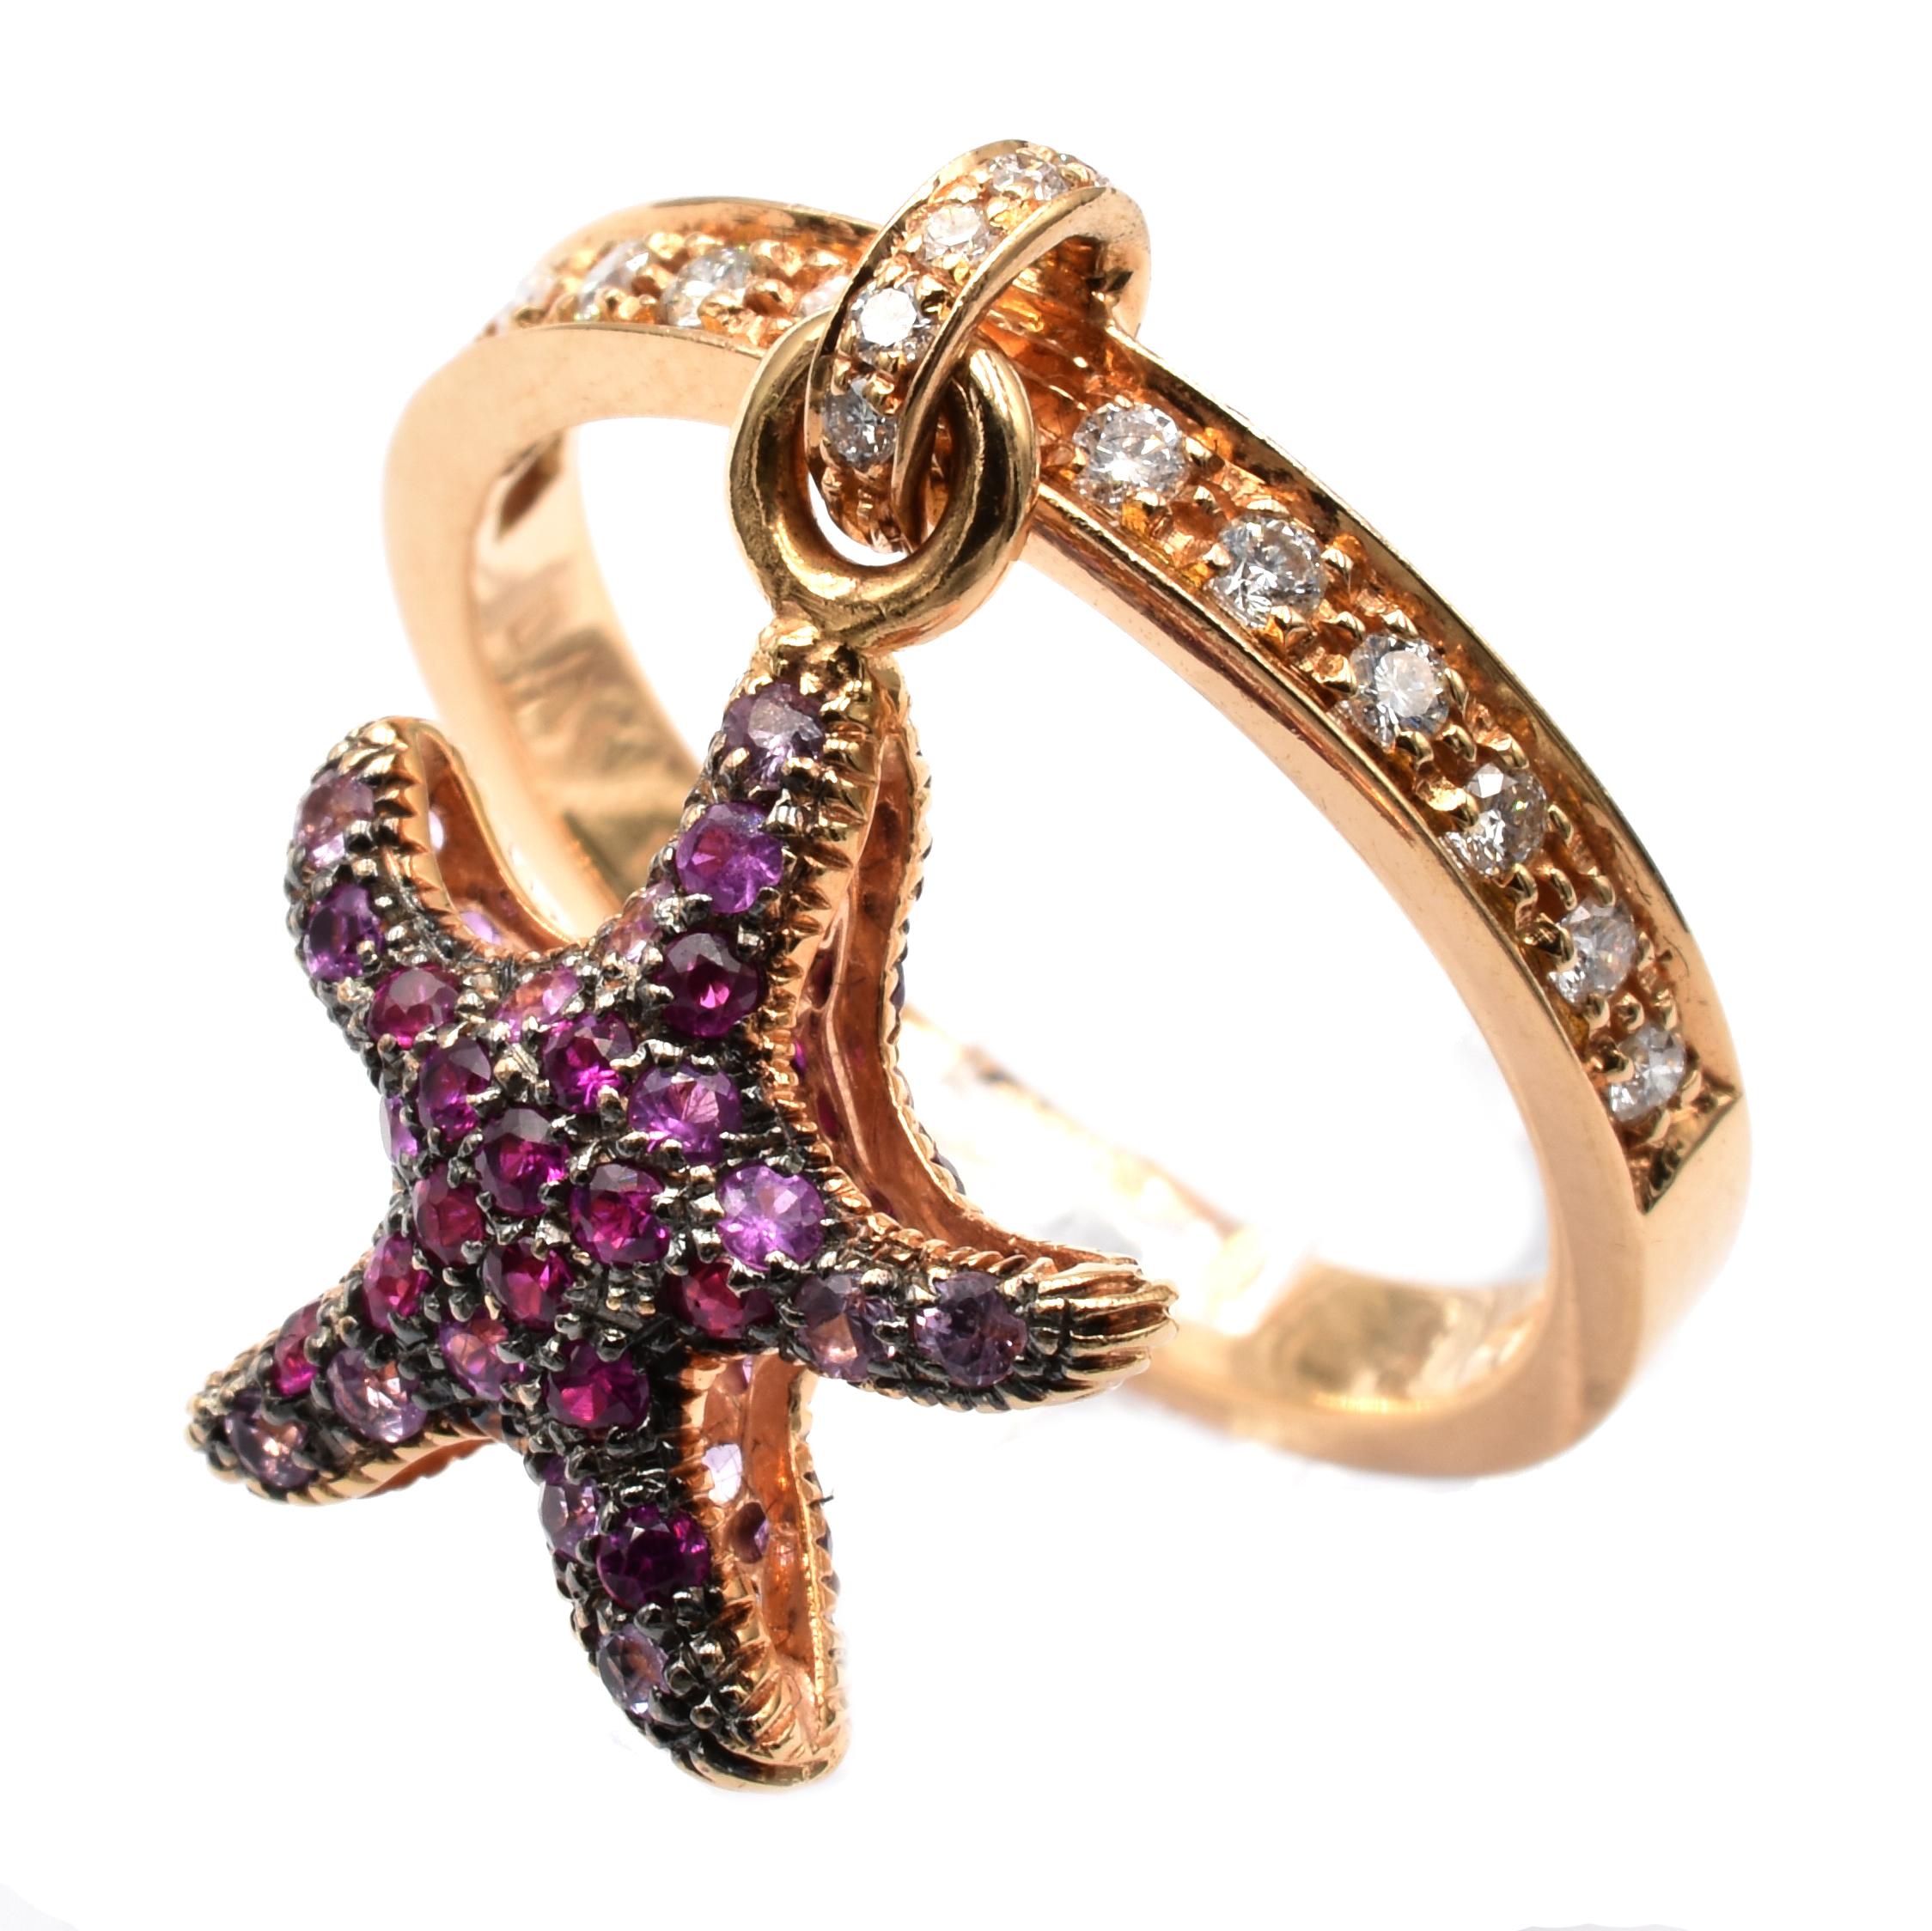 Gilberto Cassola 18Kt Rose Gold Ring with Pendant Starfish Charm. This Charm is set in both sides with Rubies on Black Rhodium Gold and hangs freely on the ring.
A very Funny and Happy Piece that perfectly match with a Wedding Ring for an everyday